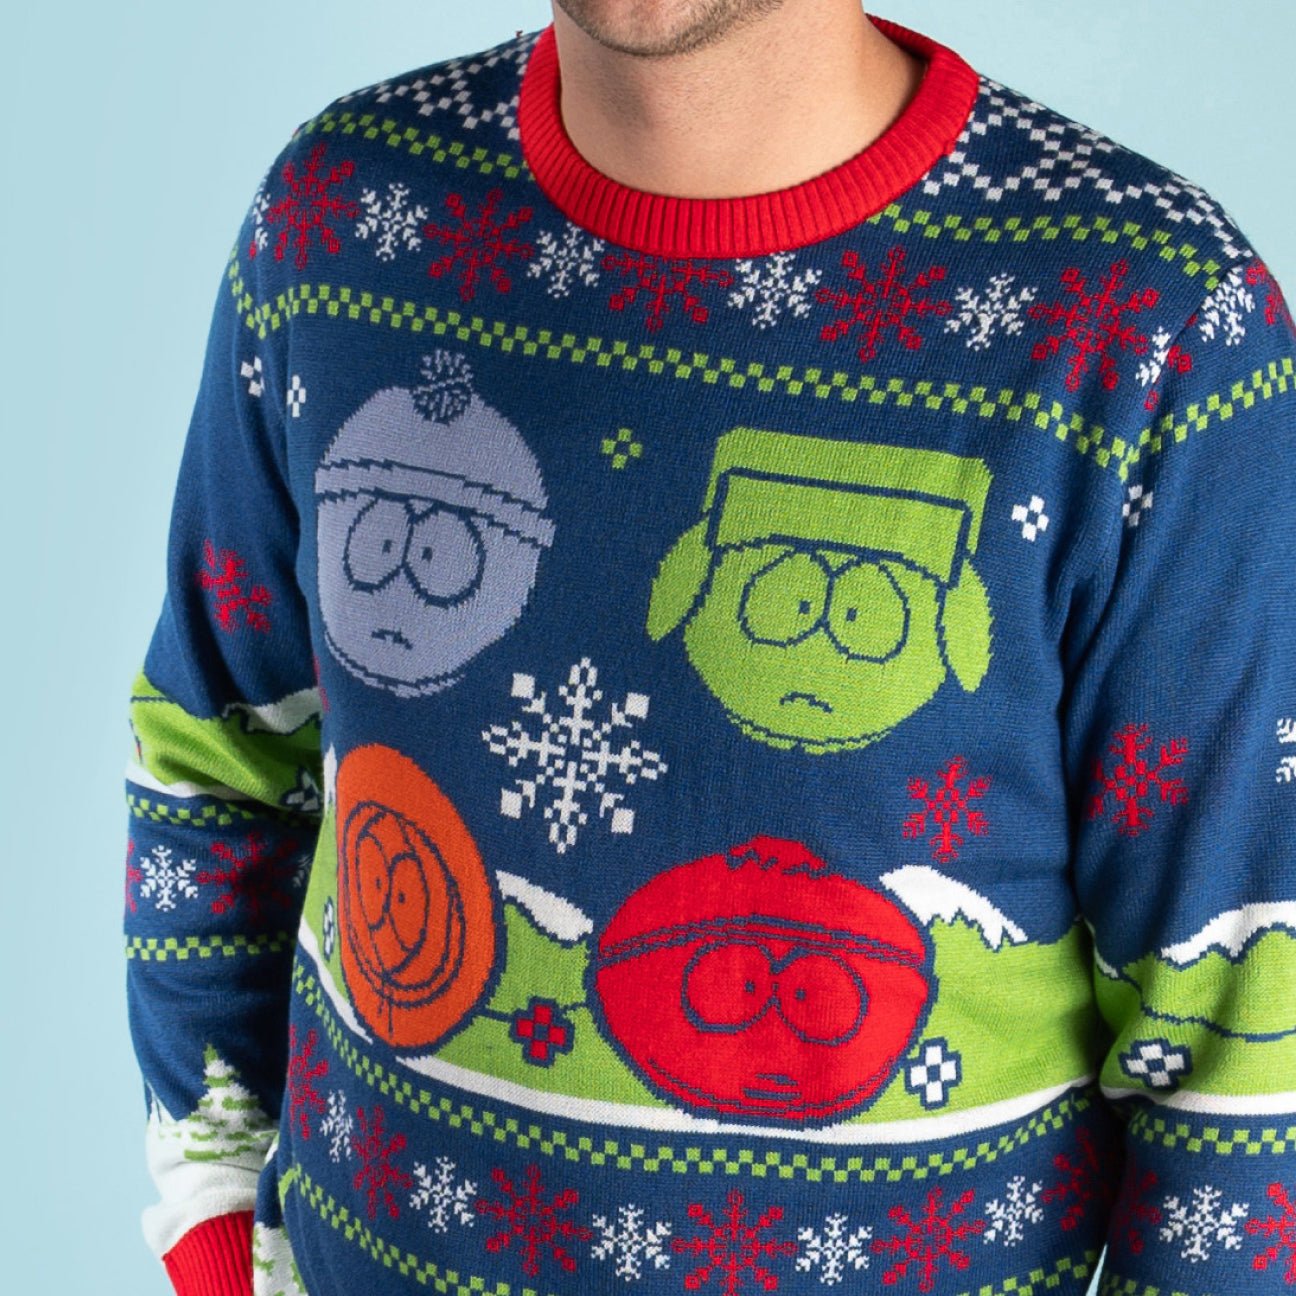 South Park Boys Ugly Holiday Sweater - Paramount Shop